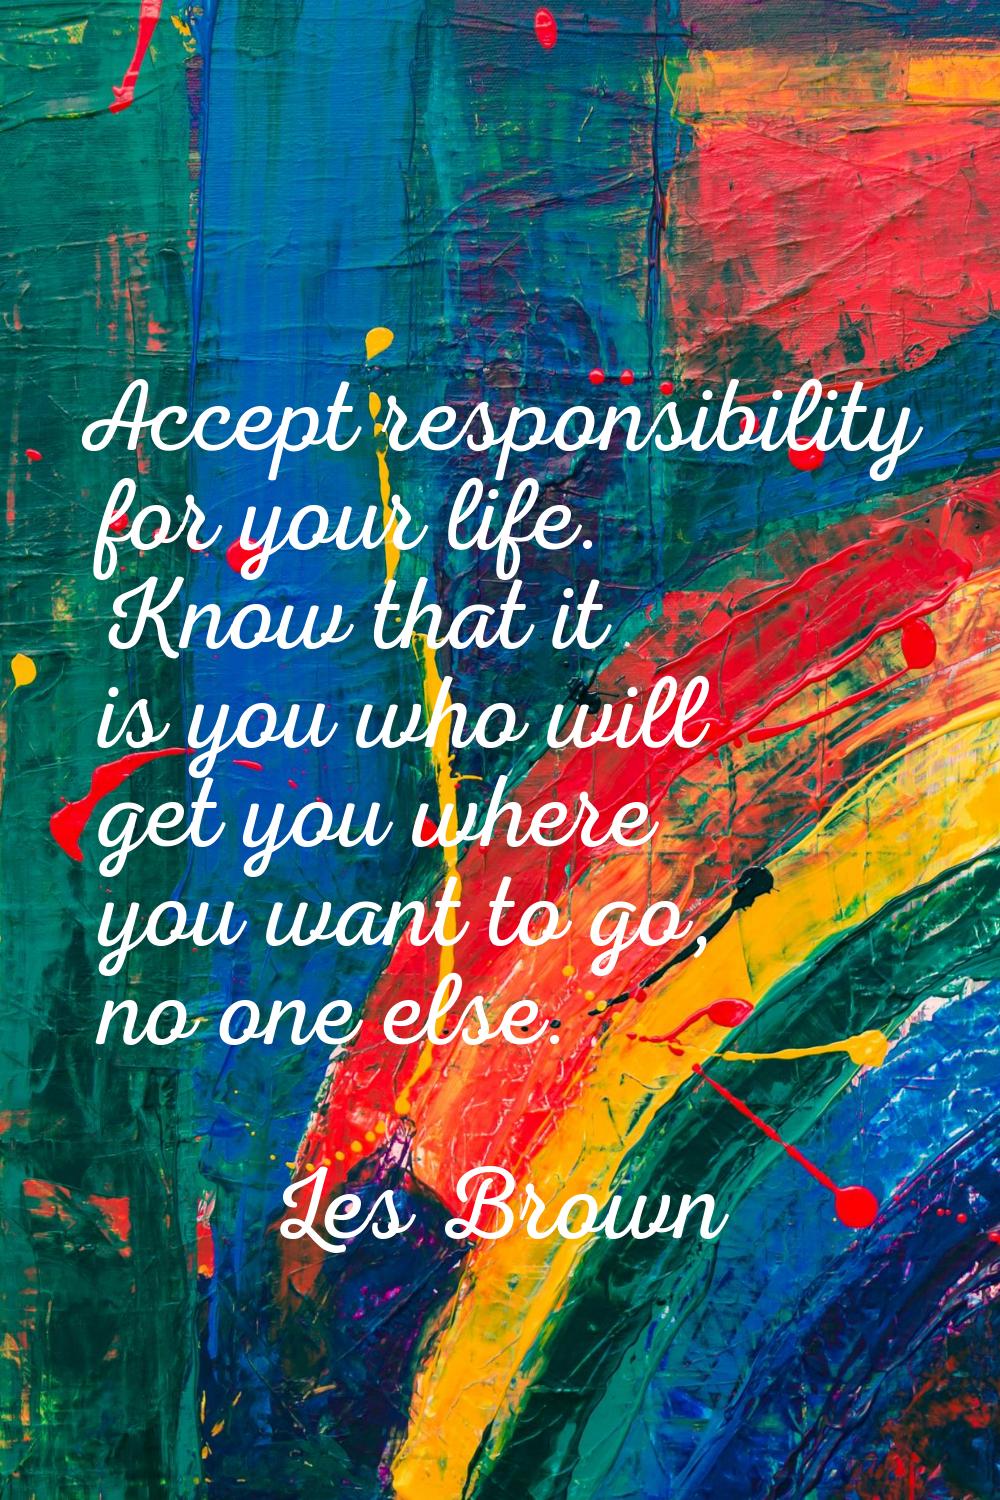 Accept responsibility for your life. Know that it is you who will get you where you want to go, no 